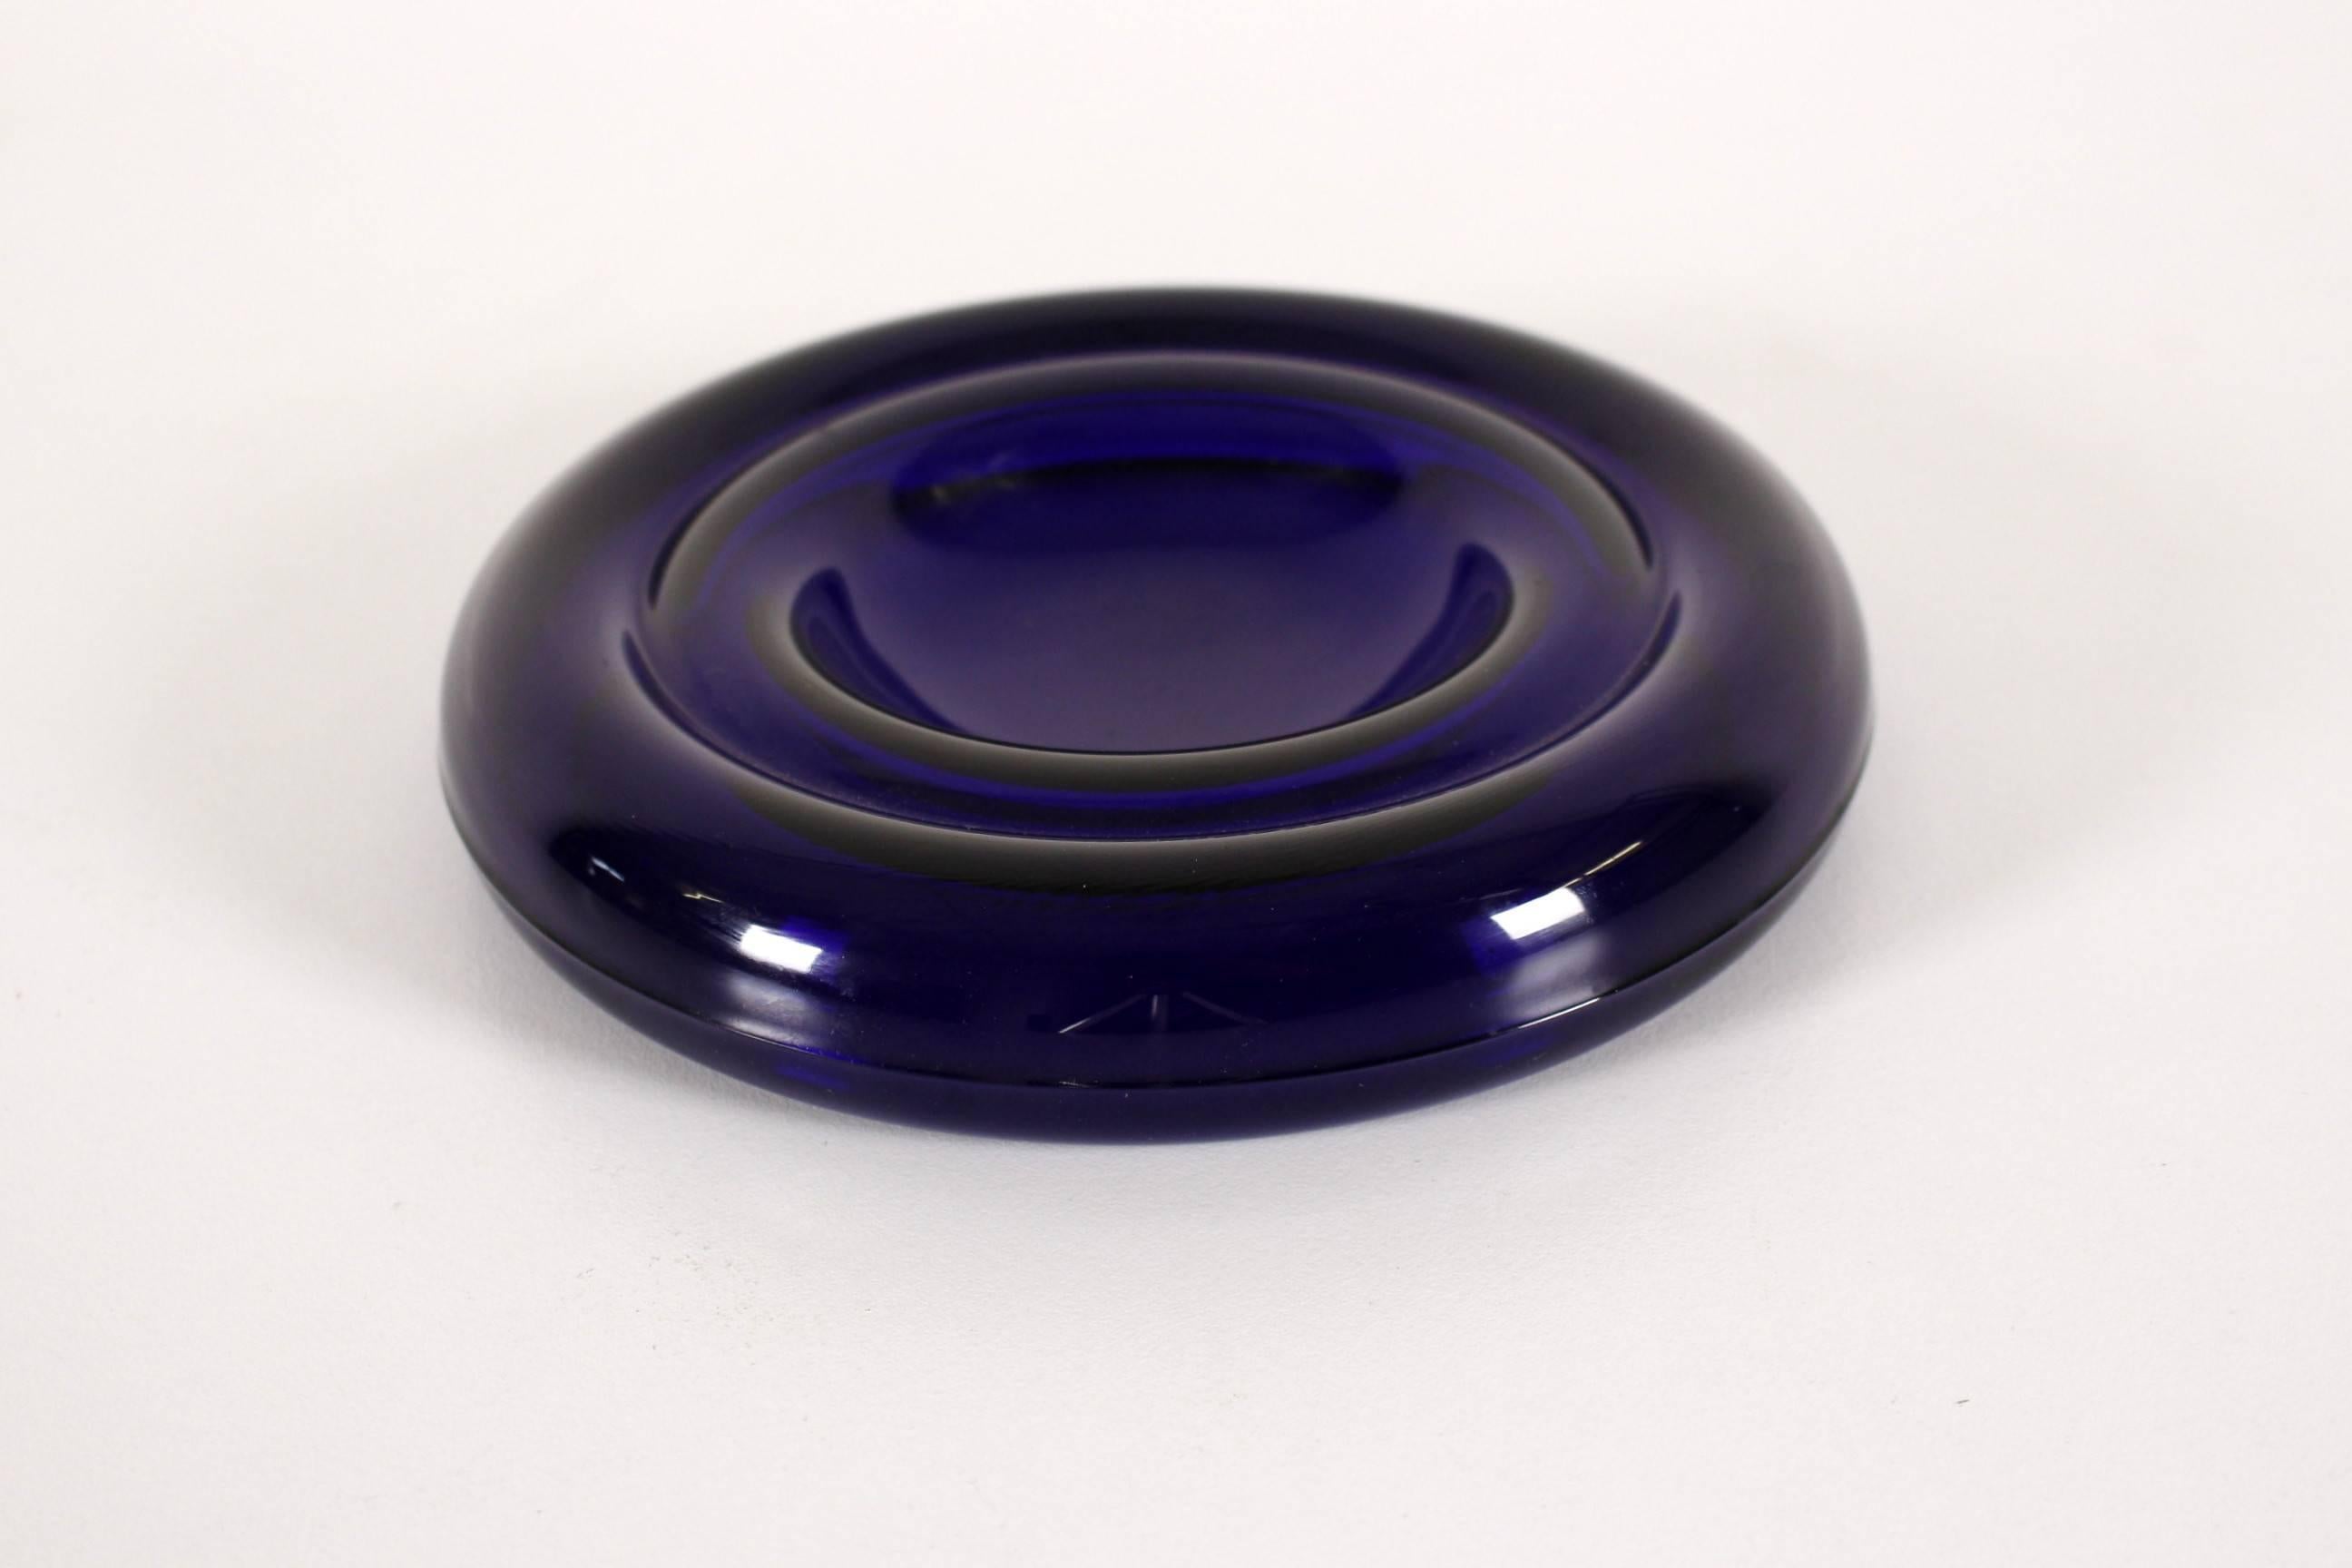 Ashtray by the designer Enzo Mari was created during the 1980s and is made from dark blue glass.